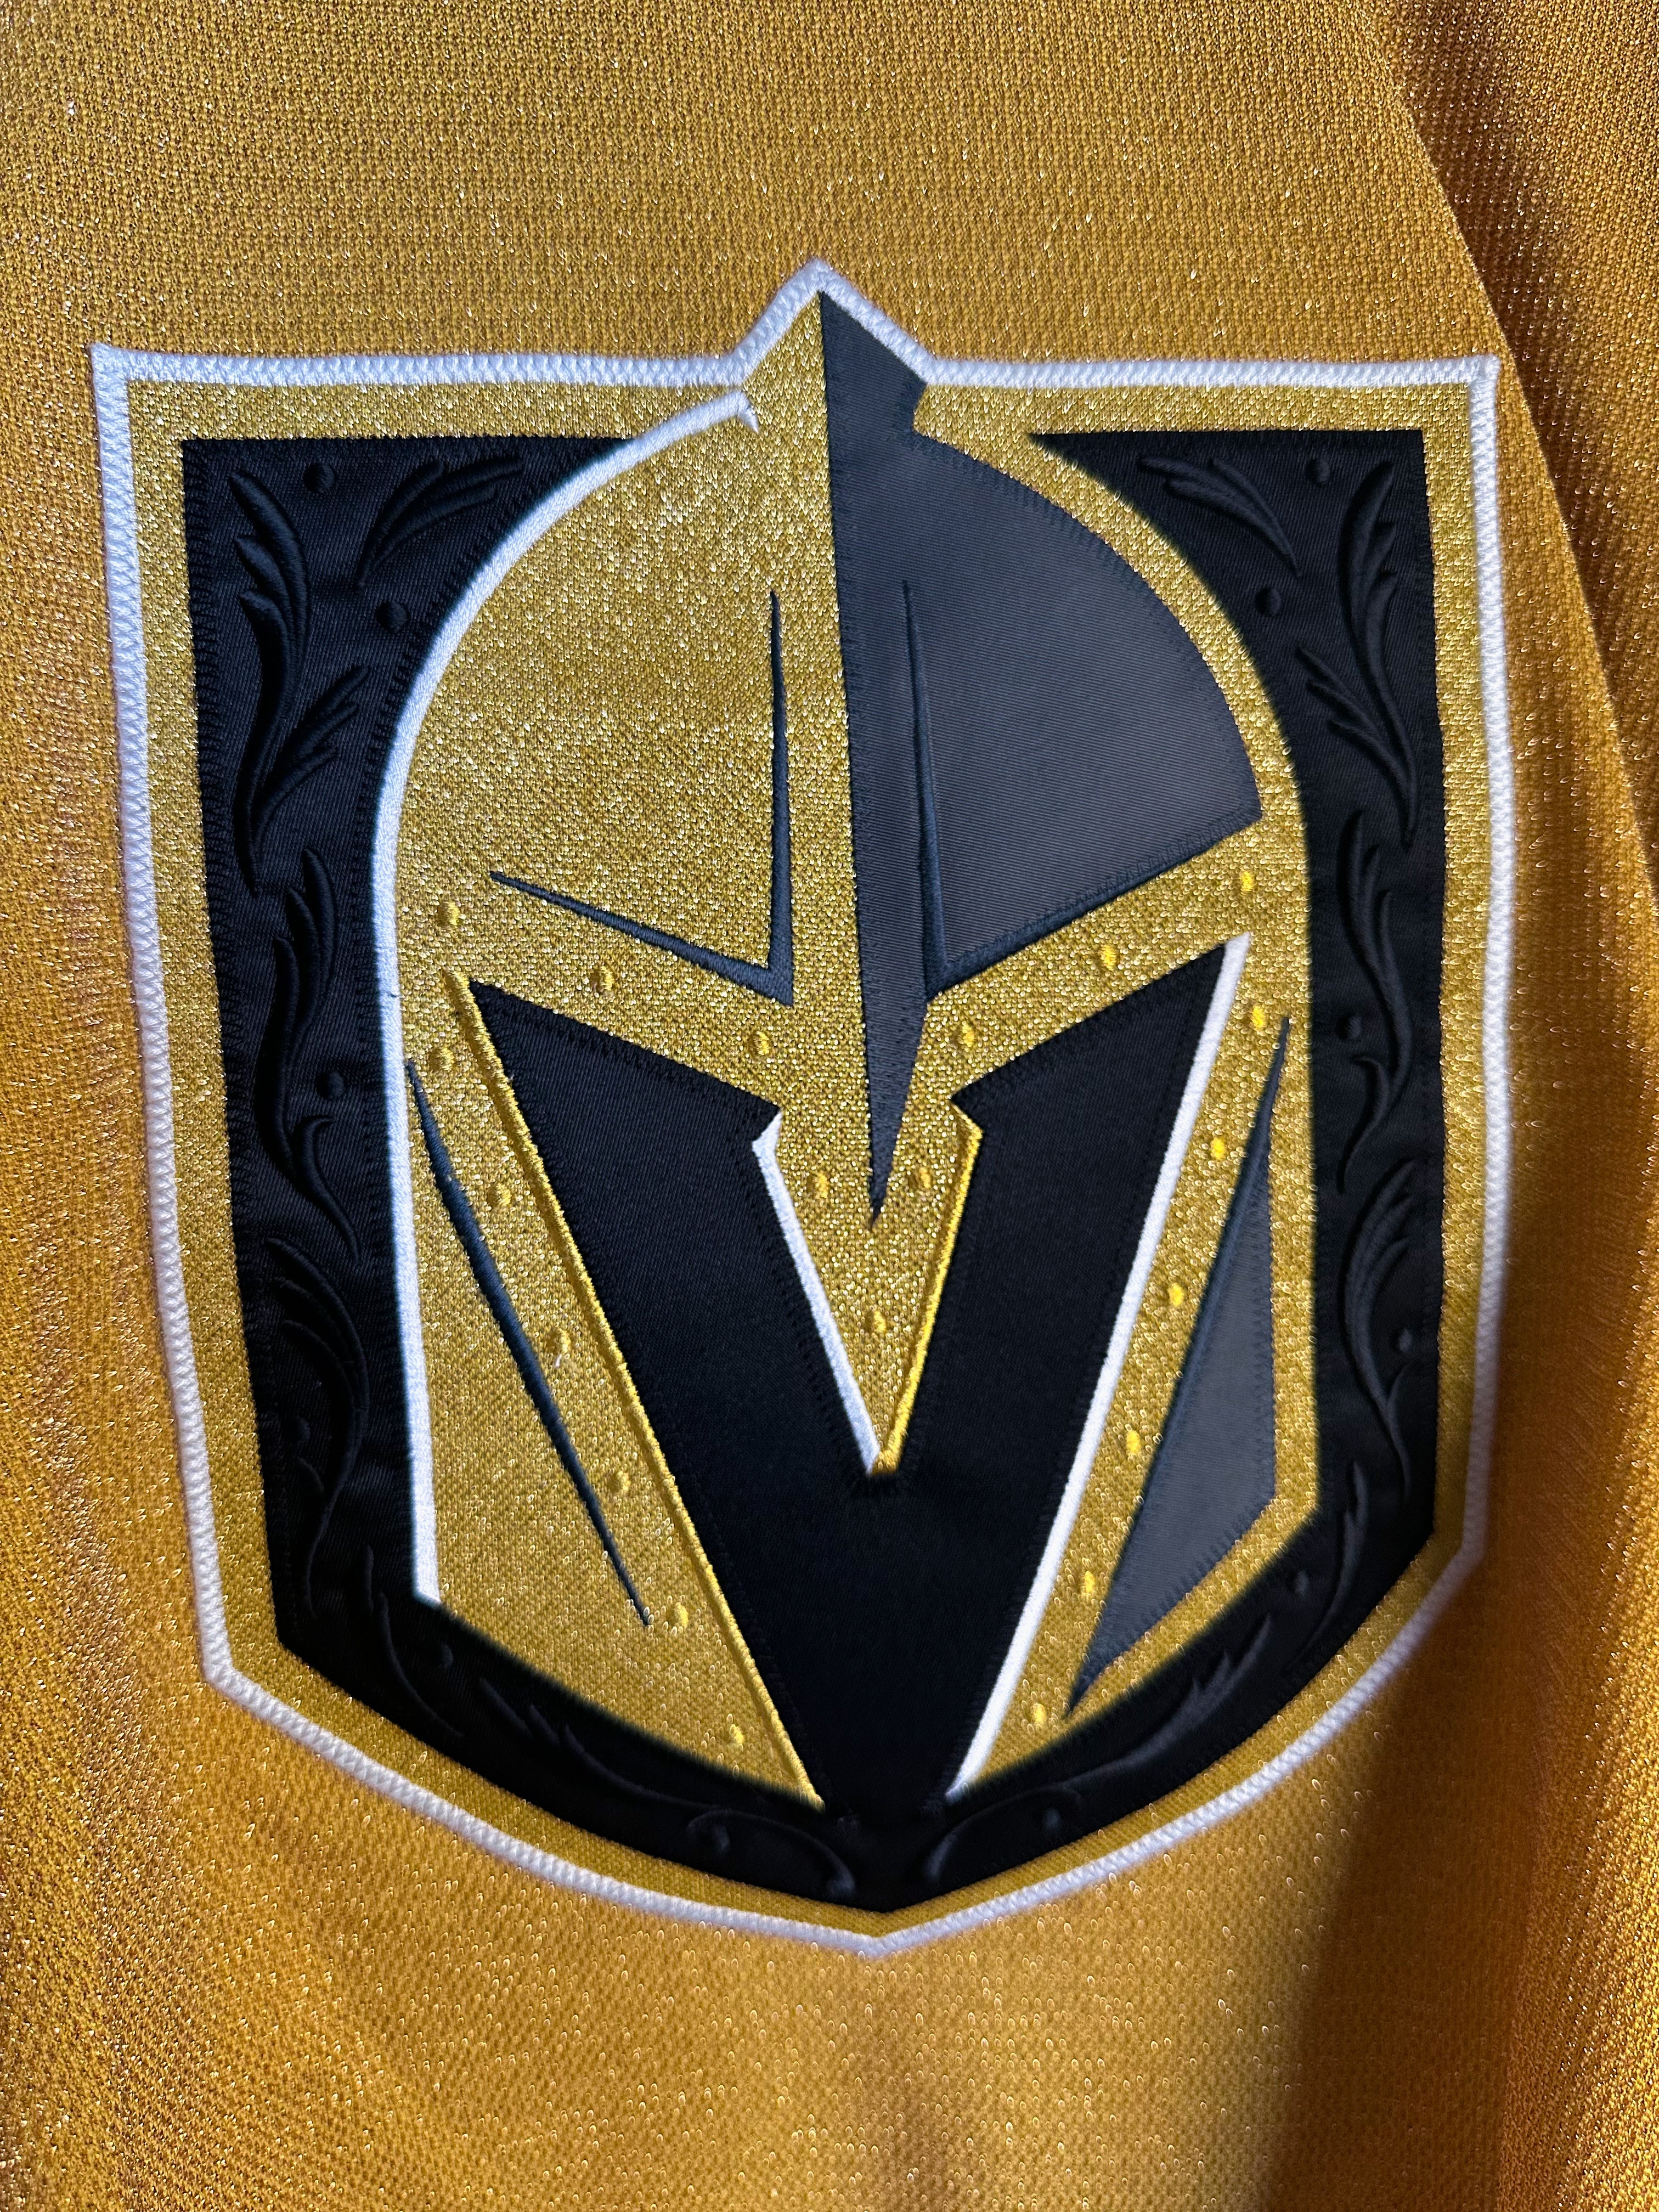 Vegas Golden Knights NHL Adidas MiC Team Issued Home Jersey Size 60G (Goalie Cut)